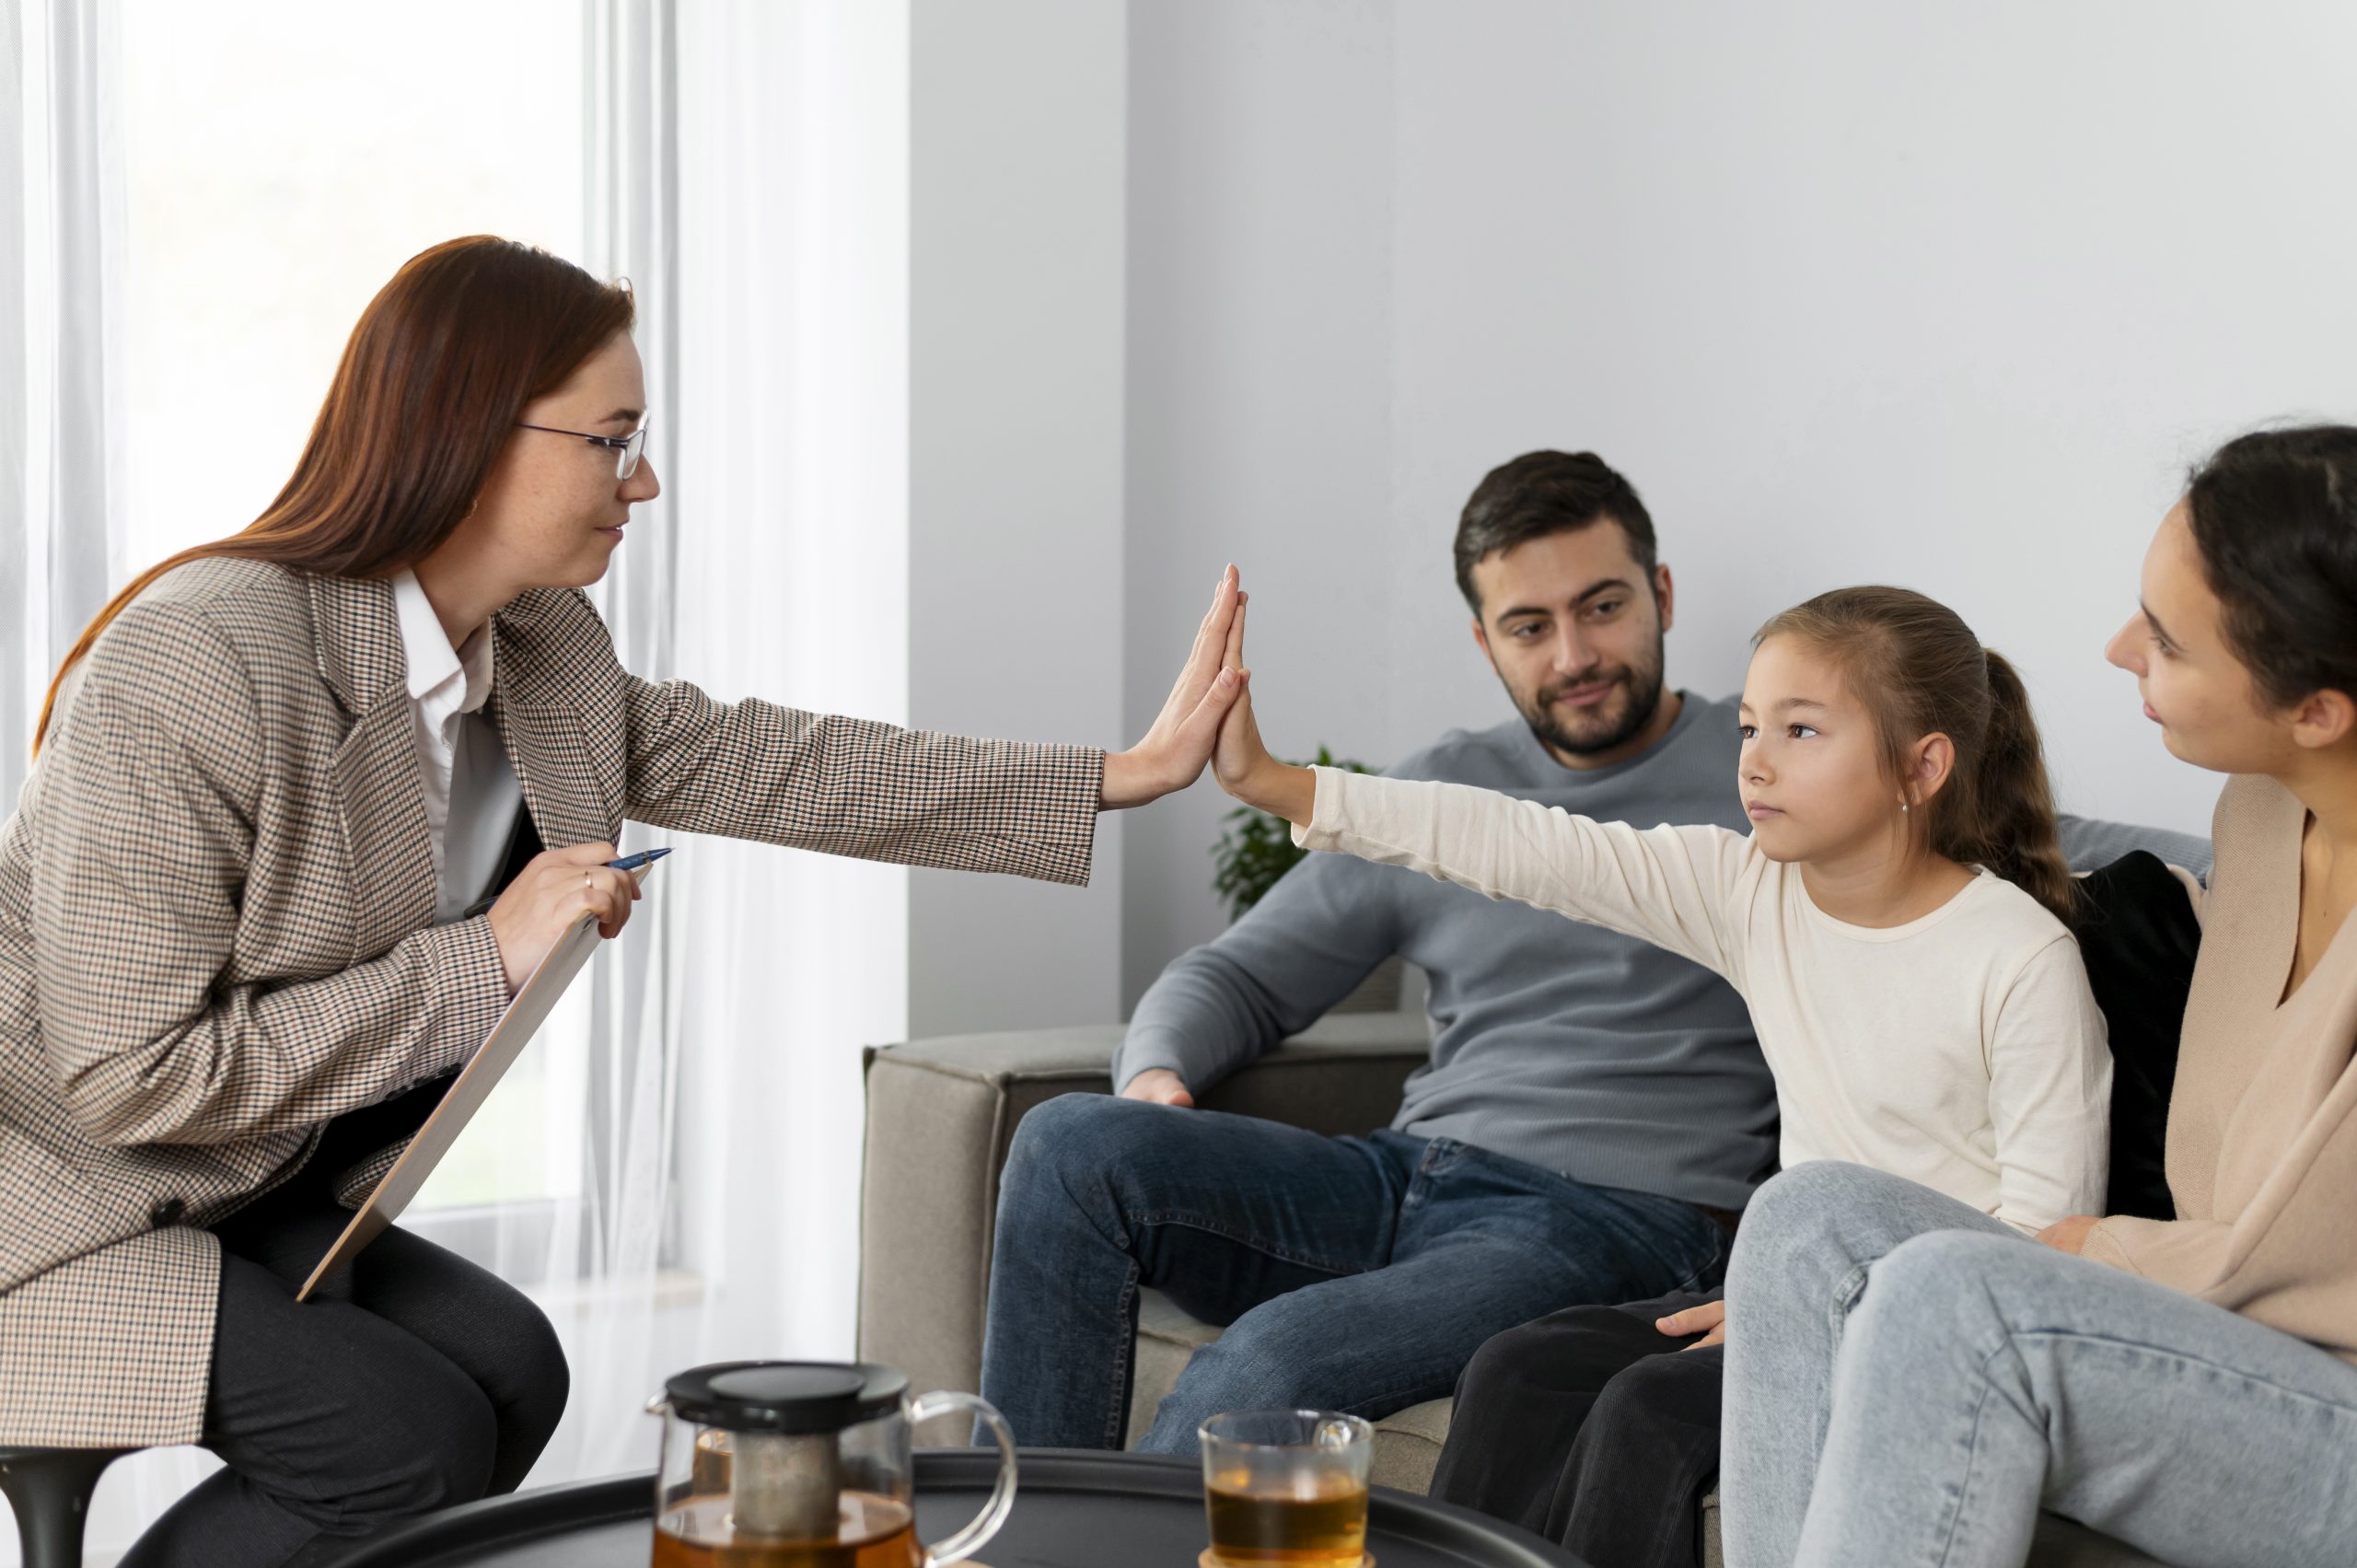 A child gives a high five to a counsellor during counselling services in Singapore. The child is sitting along with their parents opposite to the therapist.